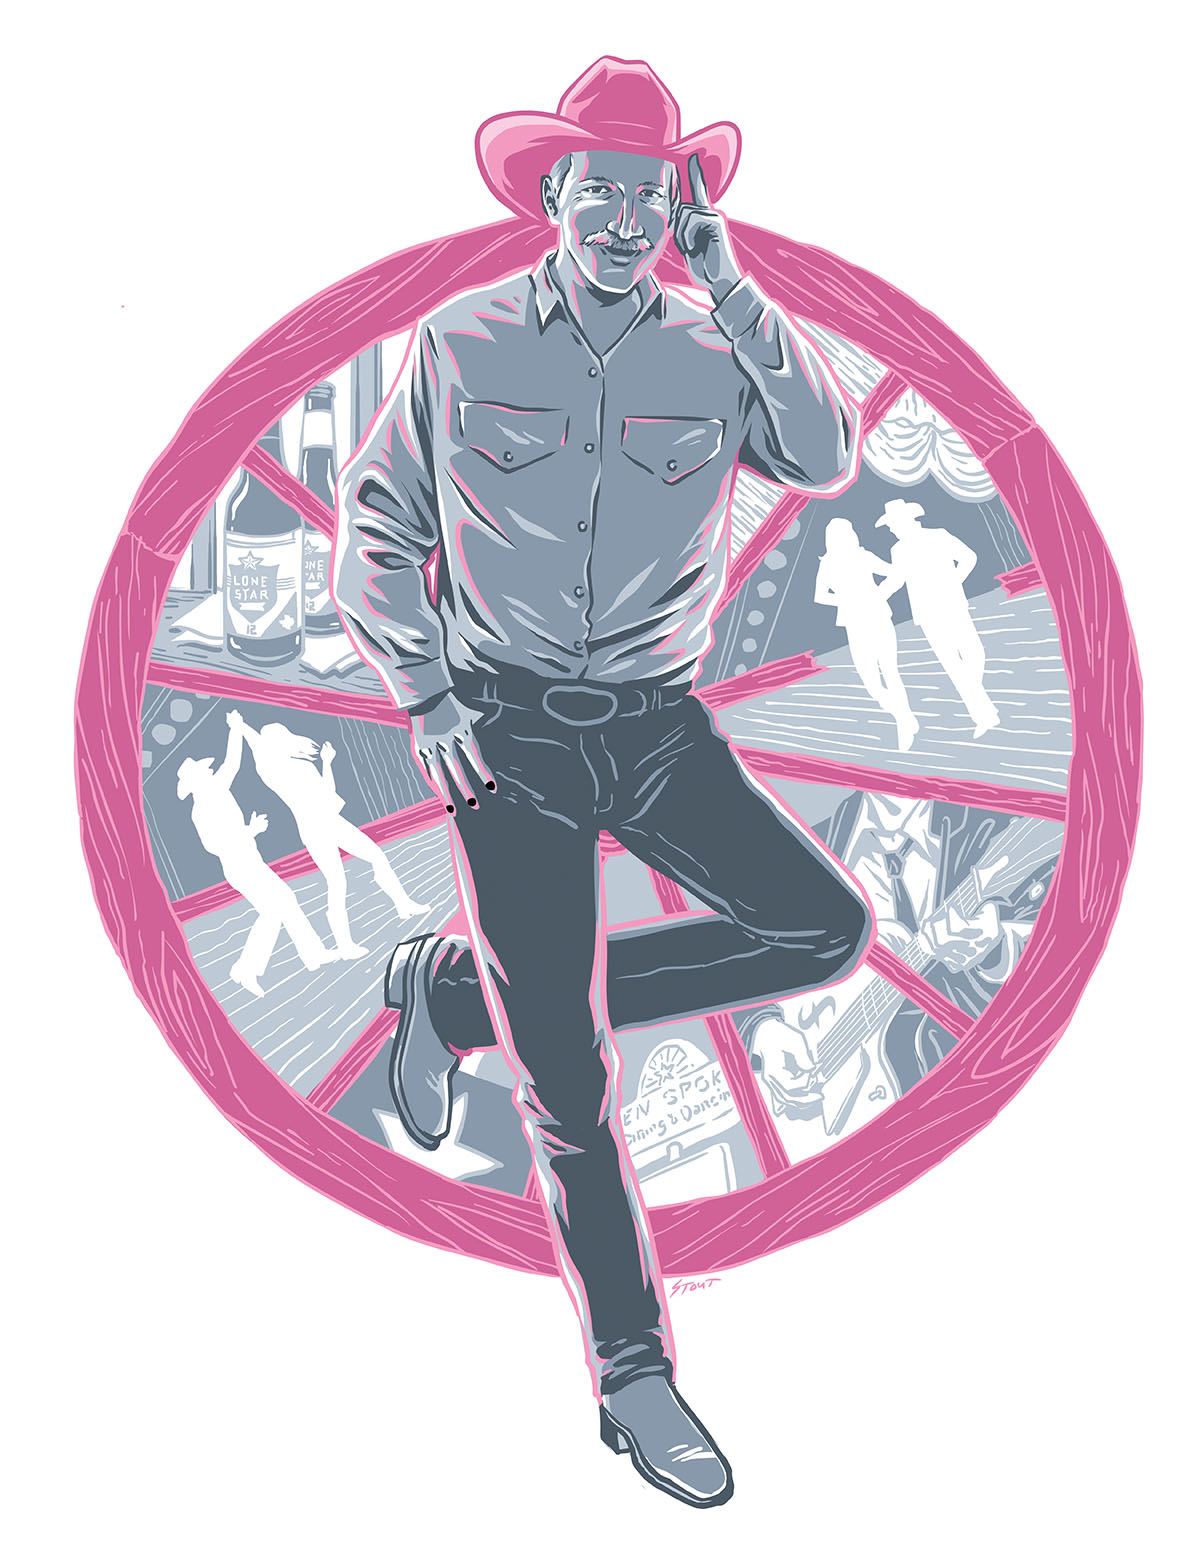 An illustration of a man in a pink cowboy hat in front of an illustrated spoke showing people dancing, beer, and lights